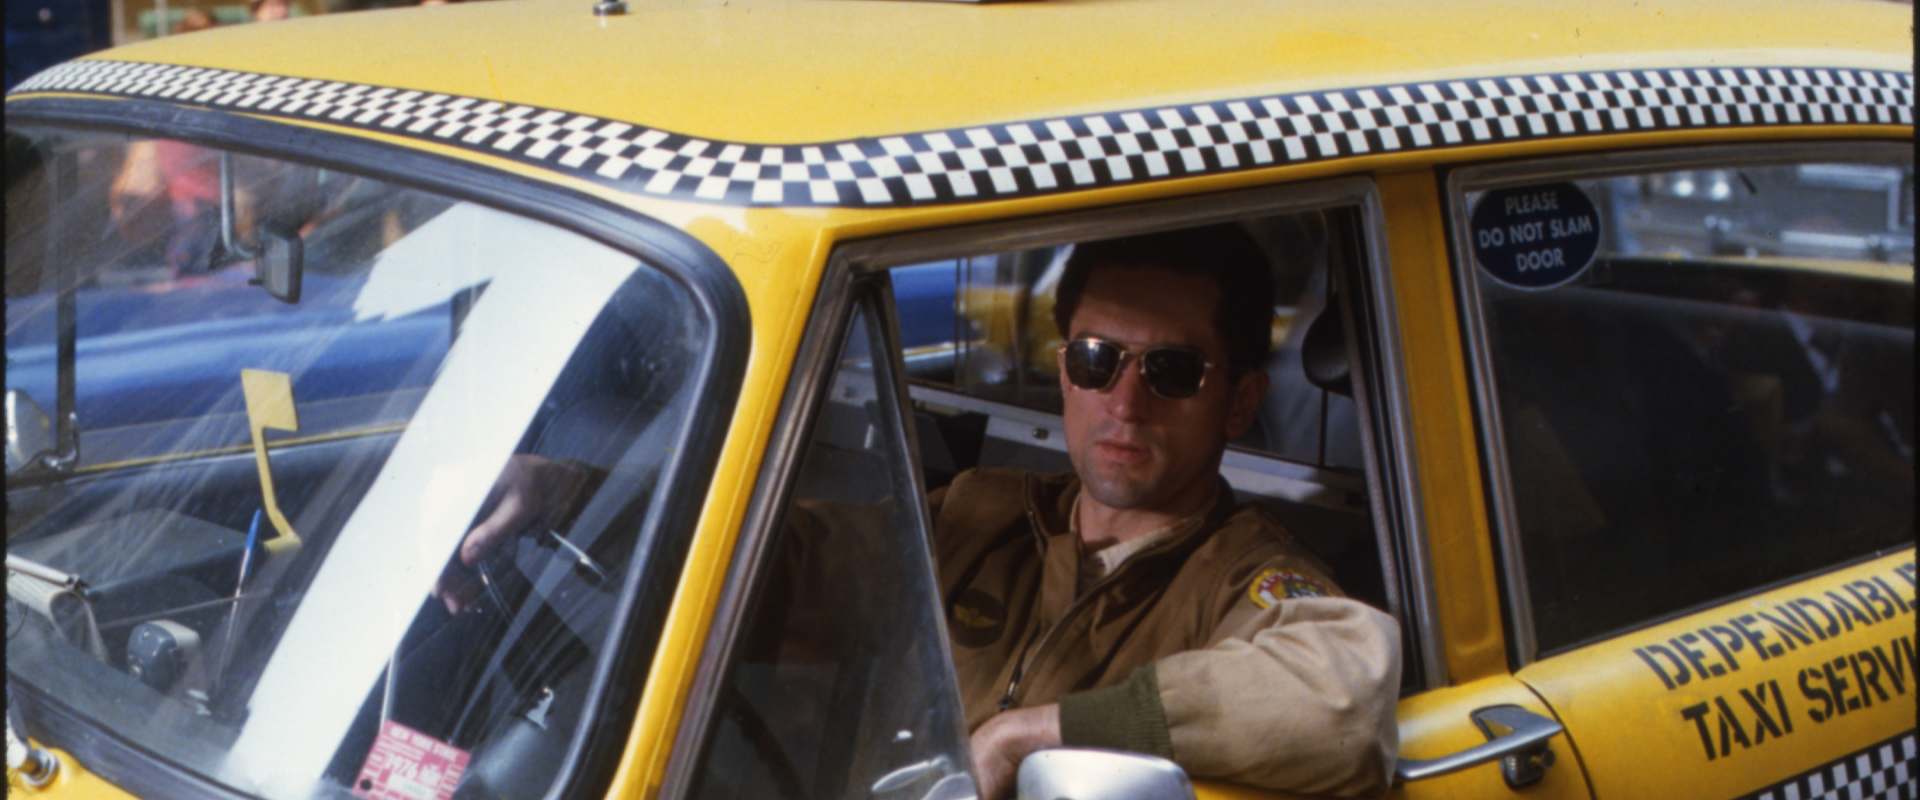 Taxi Driver background 2